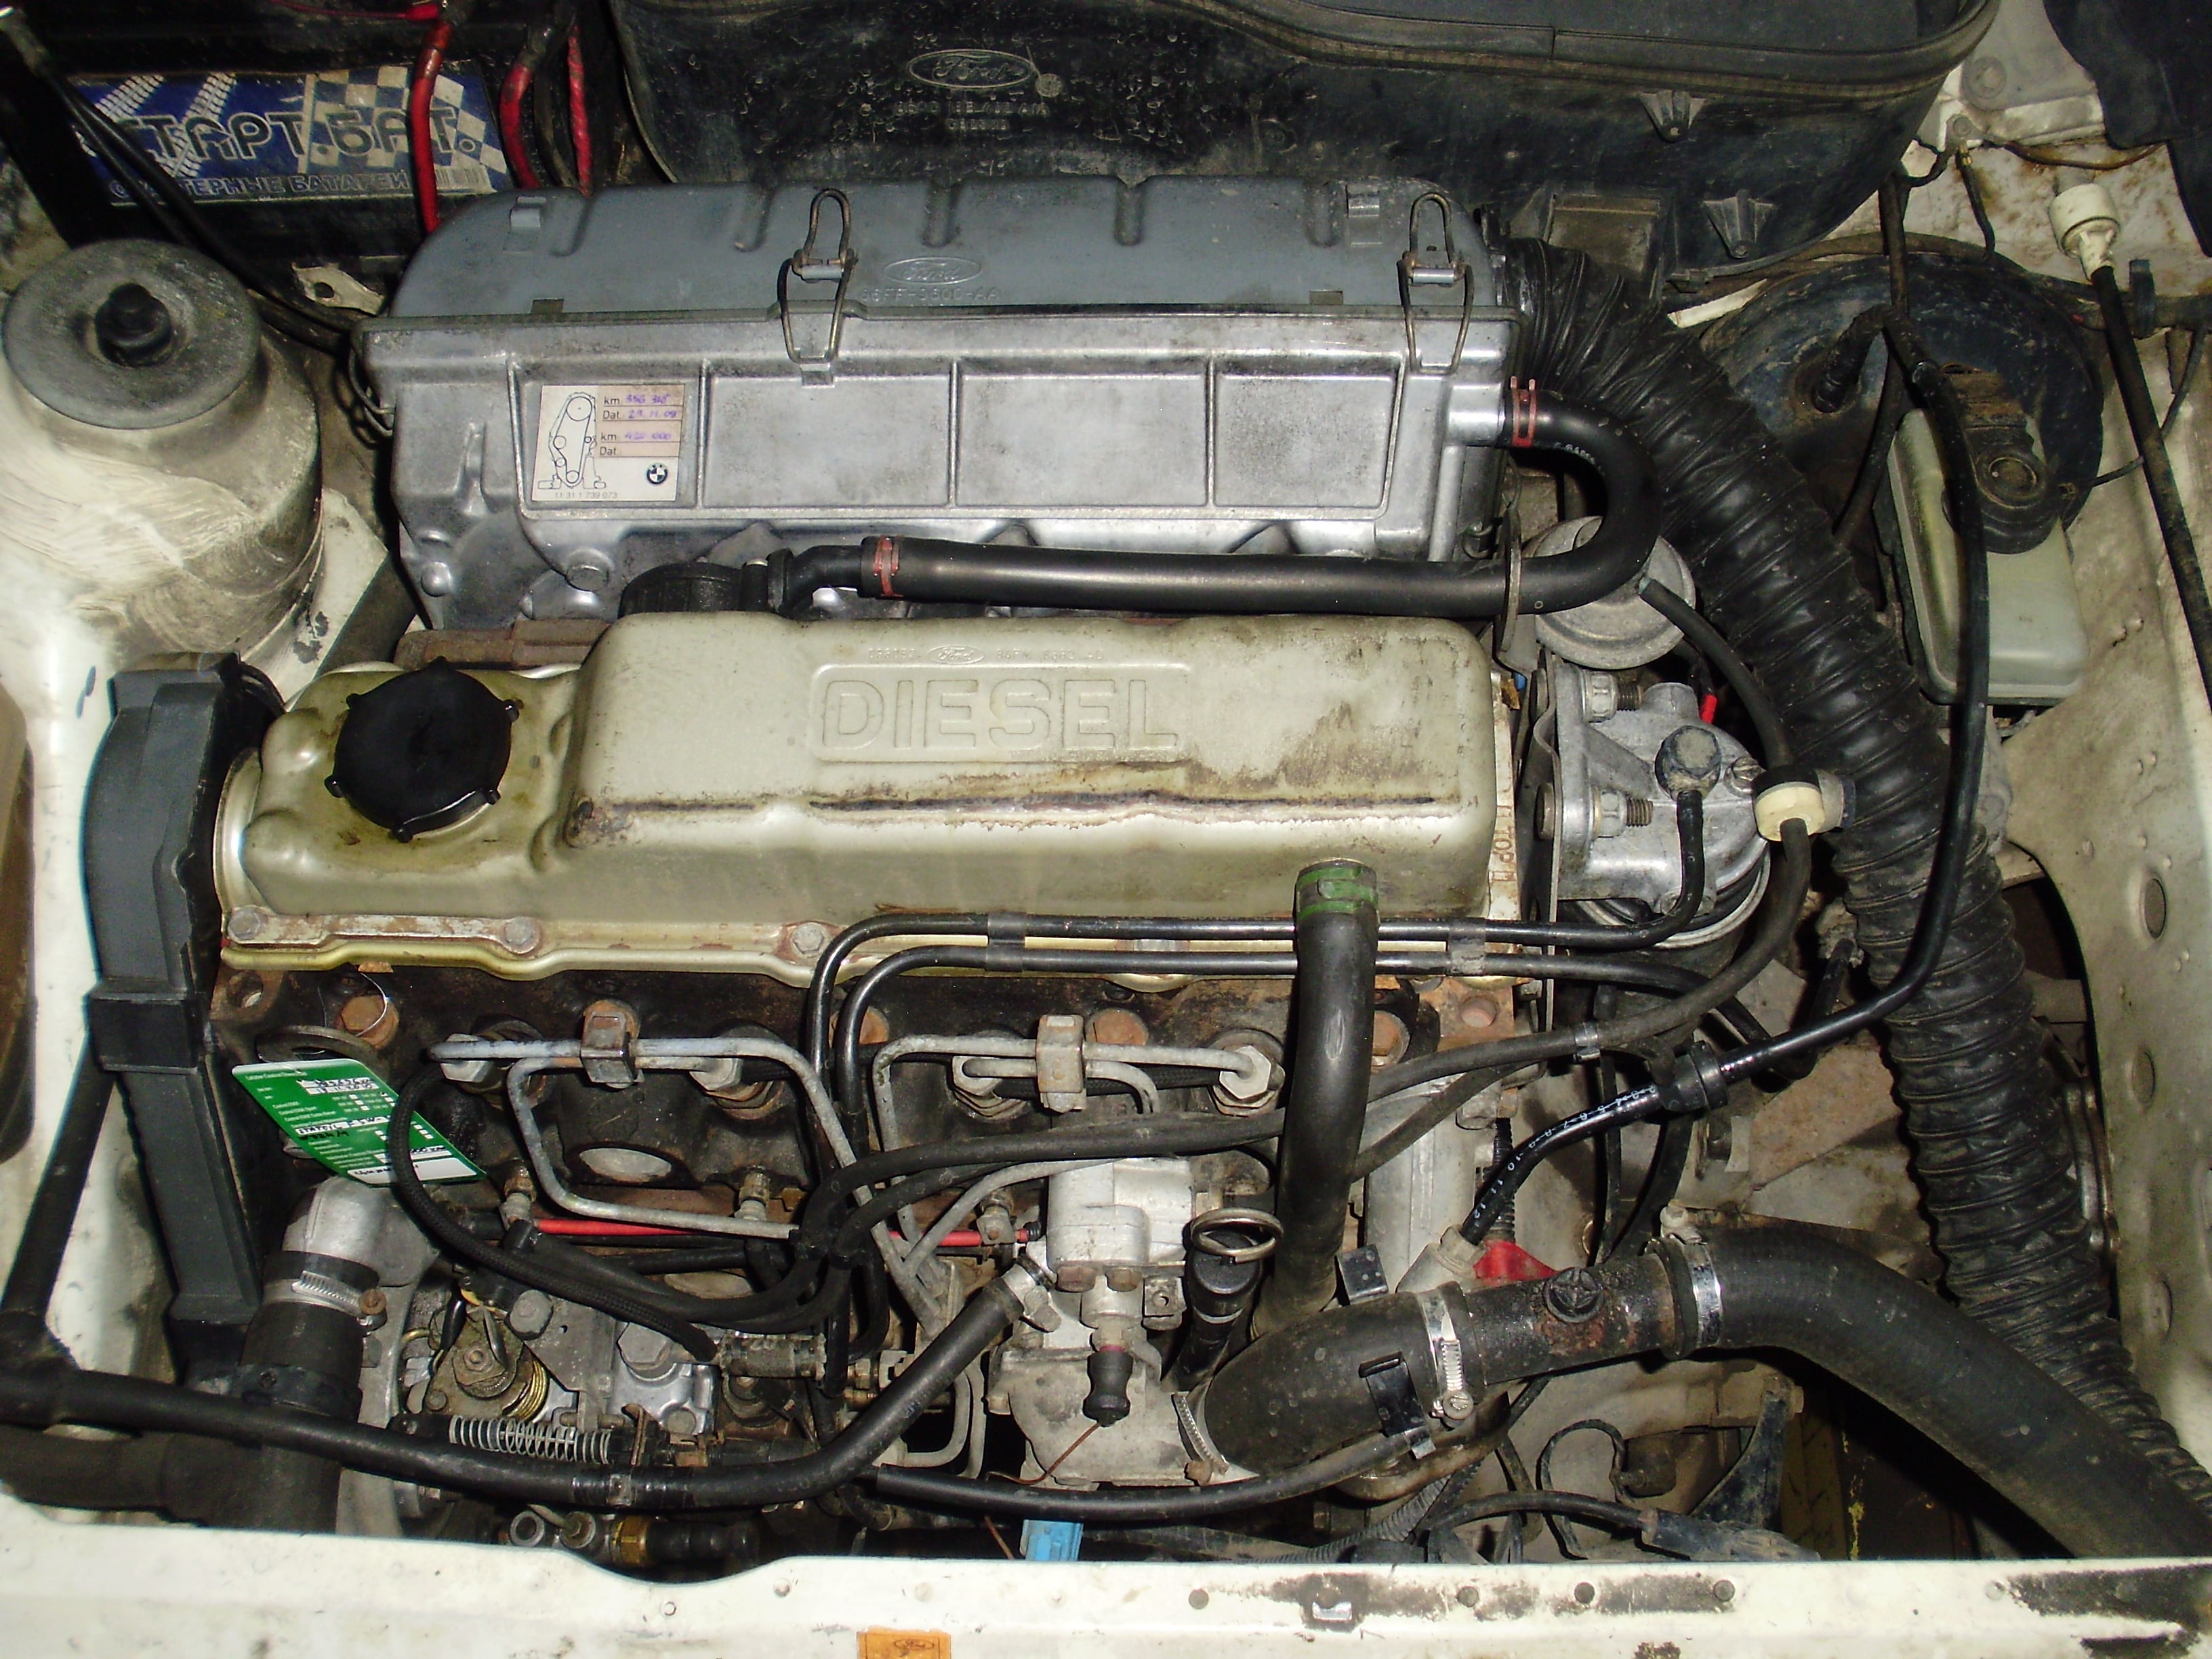 This shows the Engine in a Ford Escort circa 1988